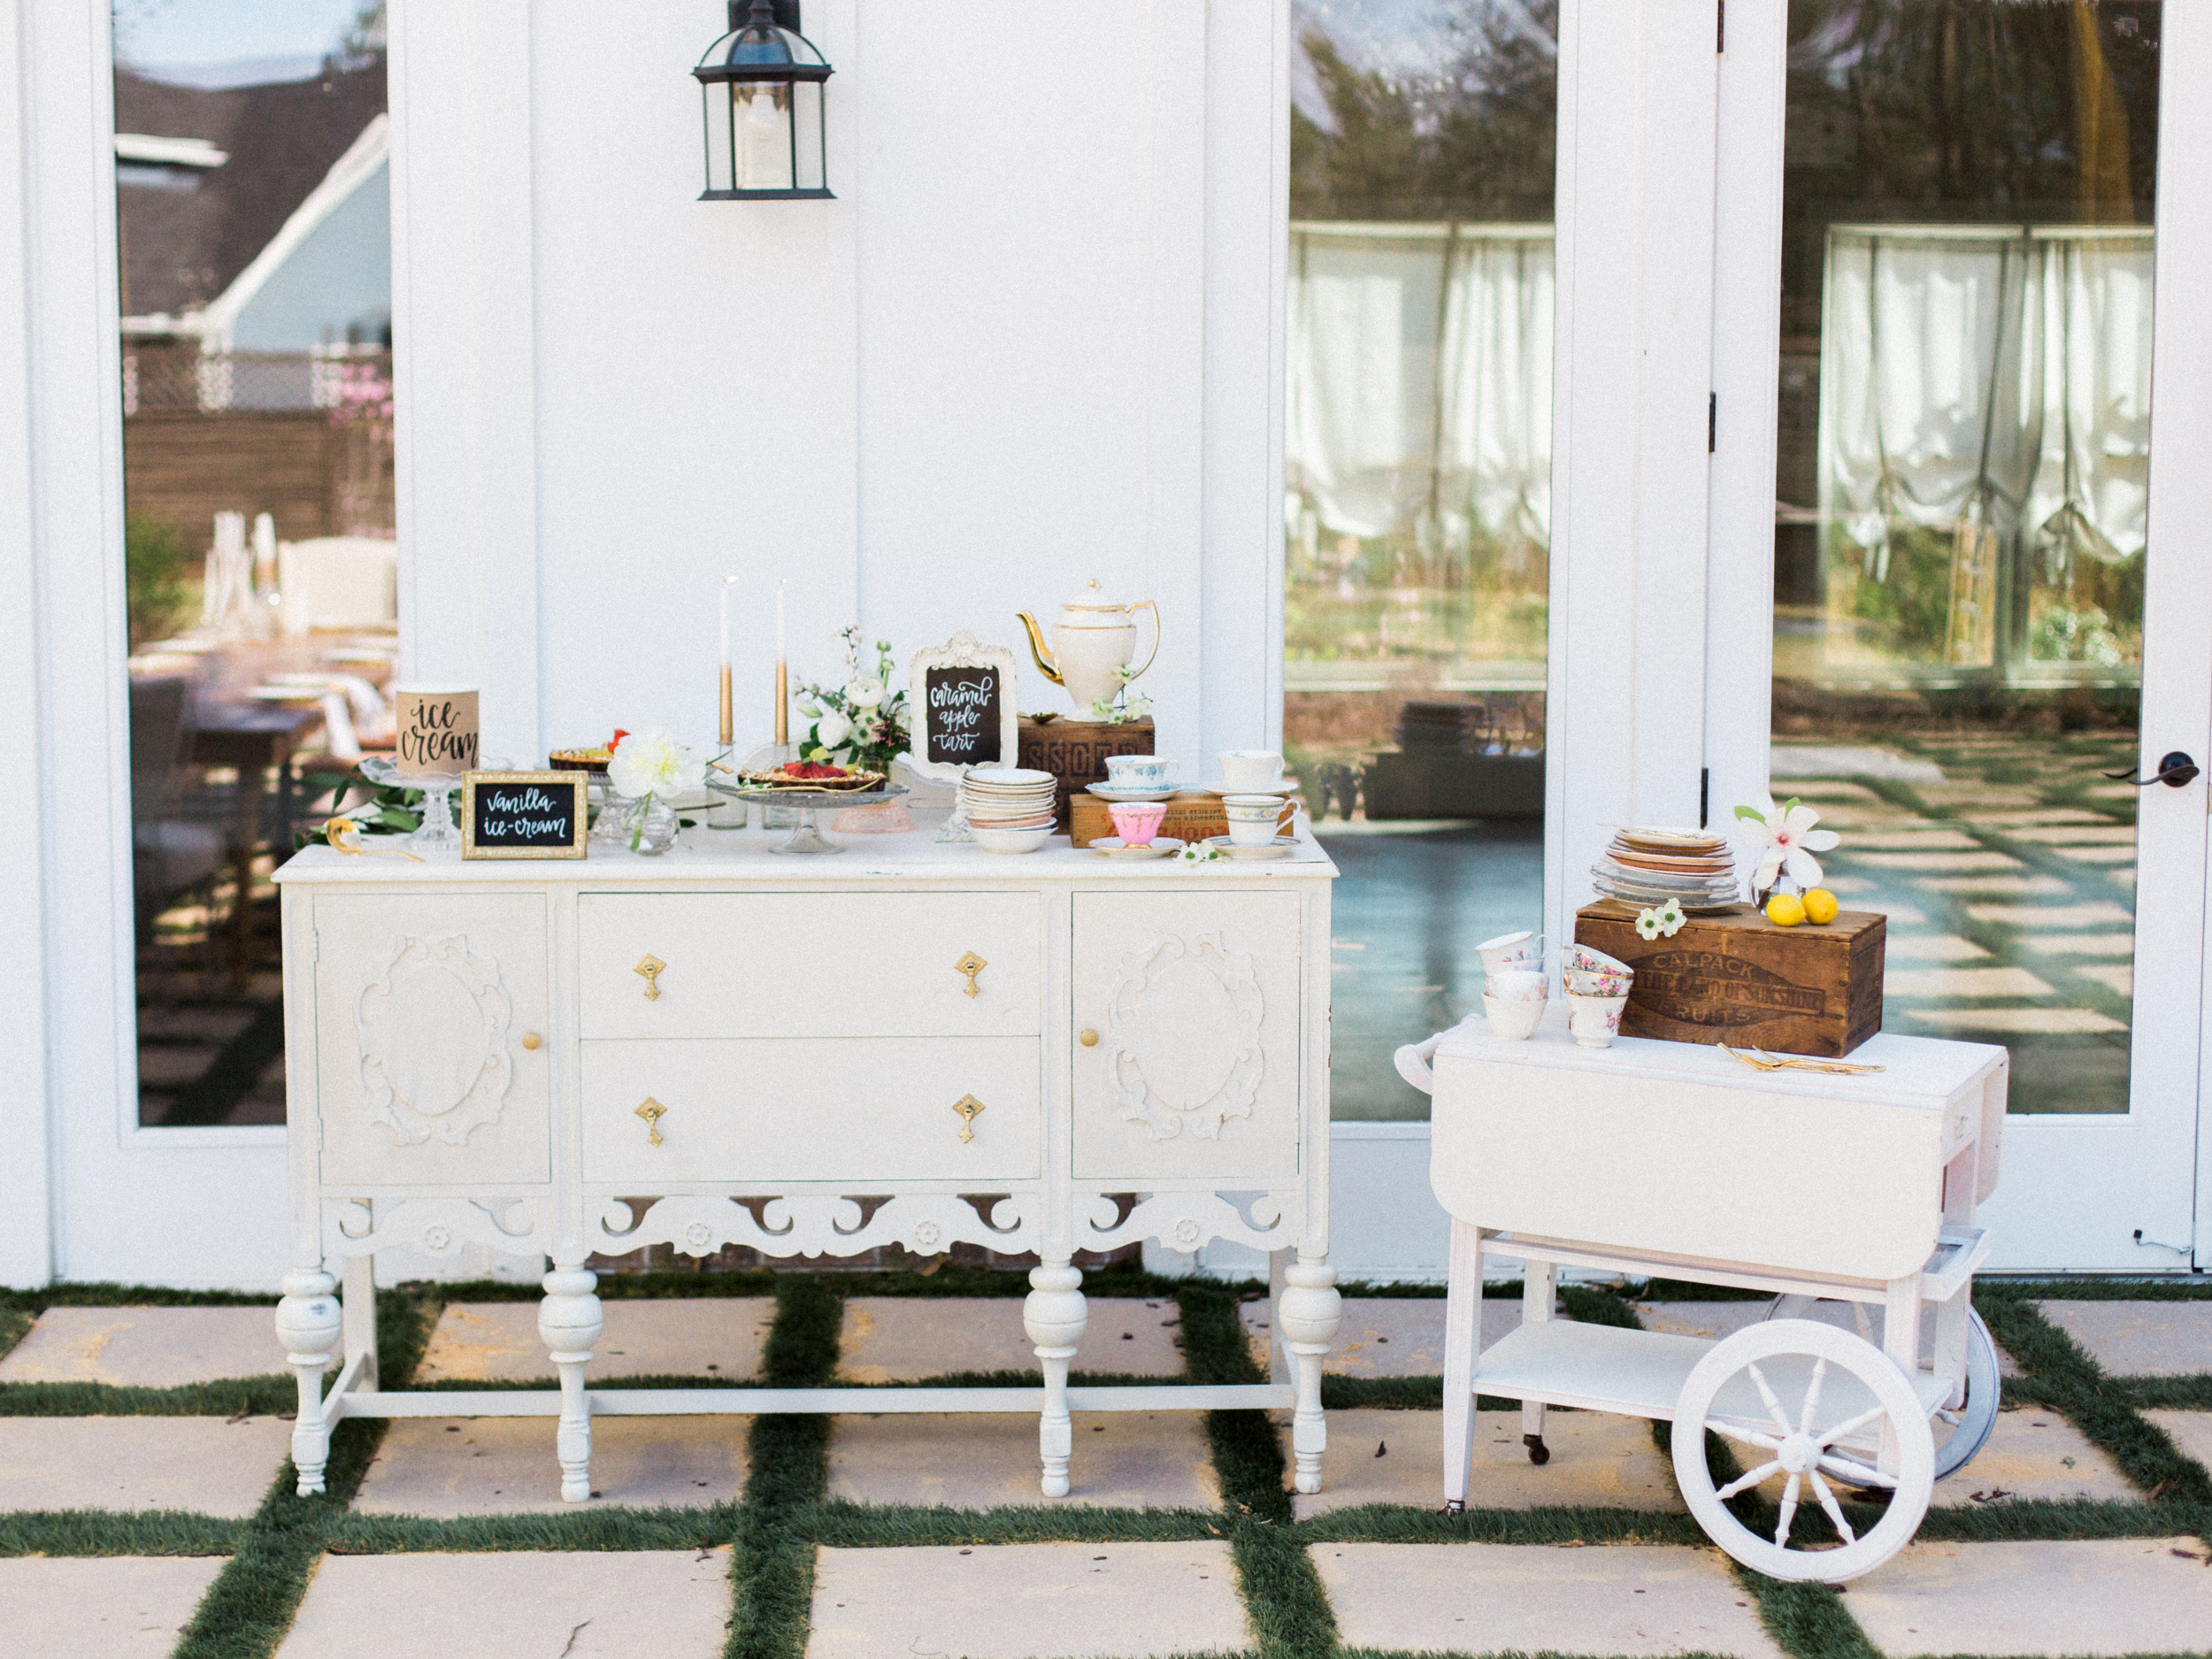 Outdoor Styled Southern Dinner Party - Behind-the-Scenes of a Styled Shoot (Dessert Station)